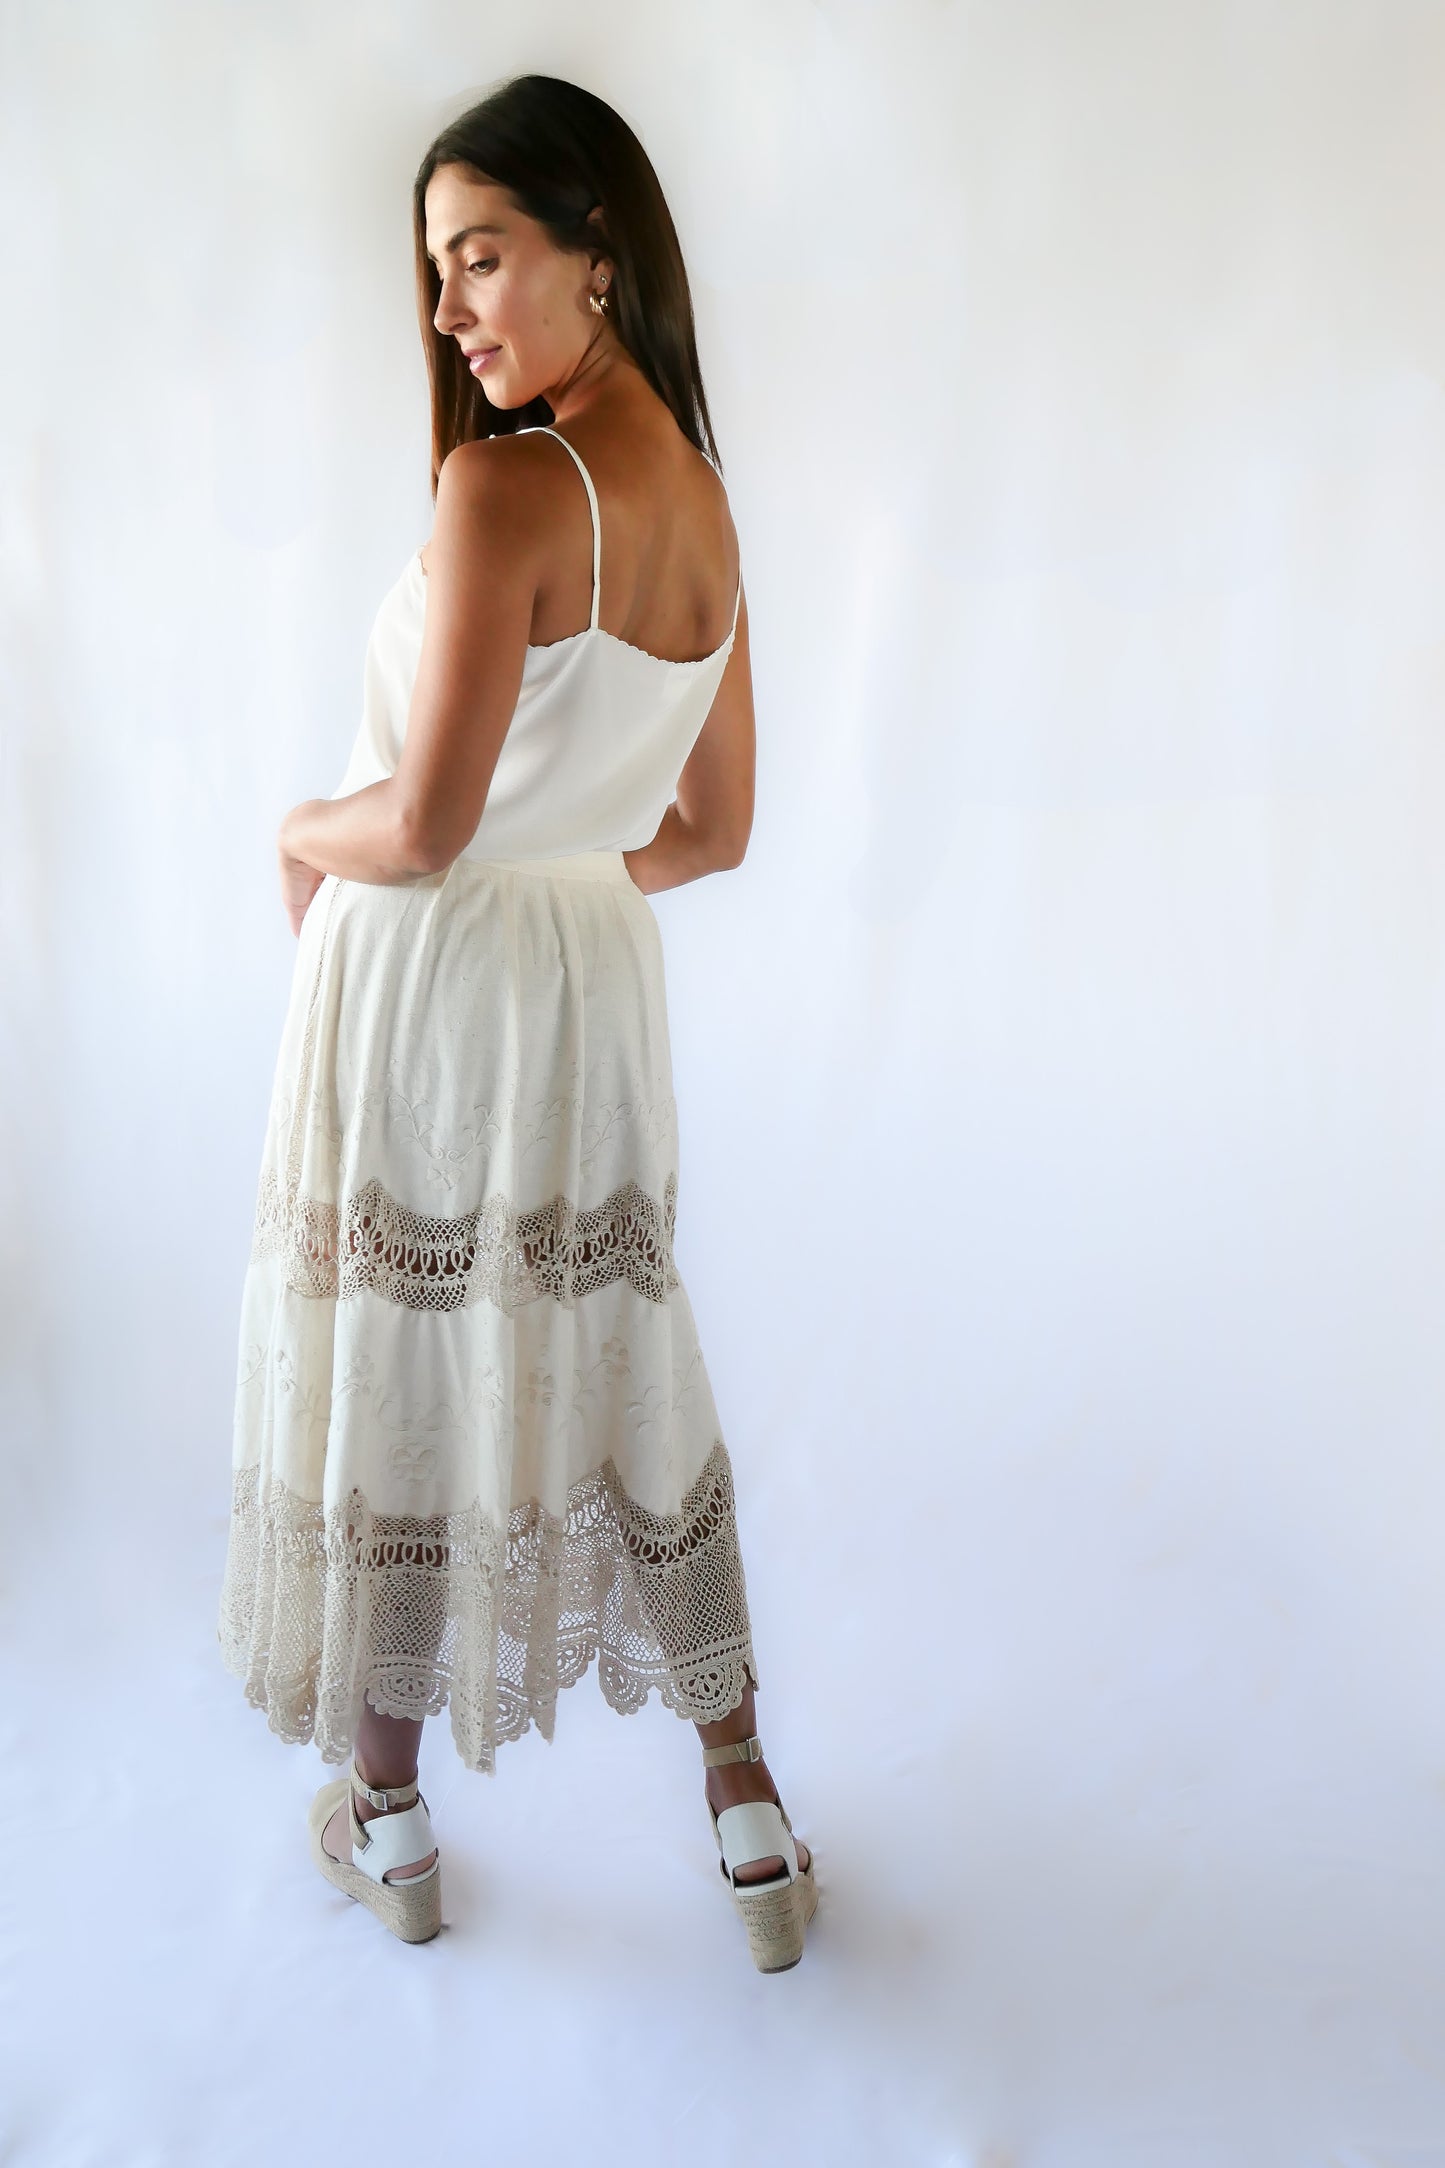 Picture yourself strolling through a sunlit Mediterranean village in this beautiful raw silk maxi skirt - an original Lim's skirt from the 1990s - with hand embroidered floral embellishments and hand crocheted trim. This skirt has a fitted, non-elastic waistband and is semi-pleated at the waist with three crochet buttons going up the side of the skirt. Measurements: Fits a size XS to Small Waist 26" Skirt length 33", hip 50" Color: Natural Material: Raw silk and cotton